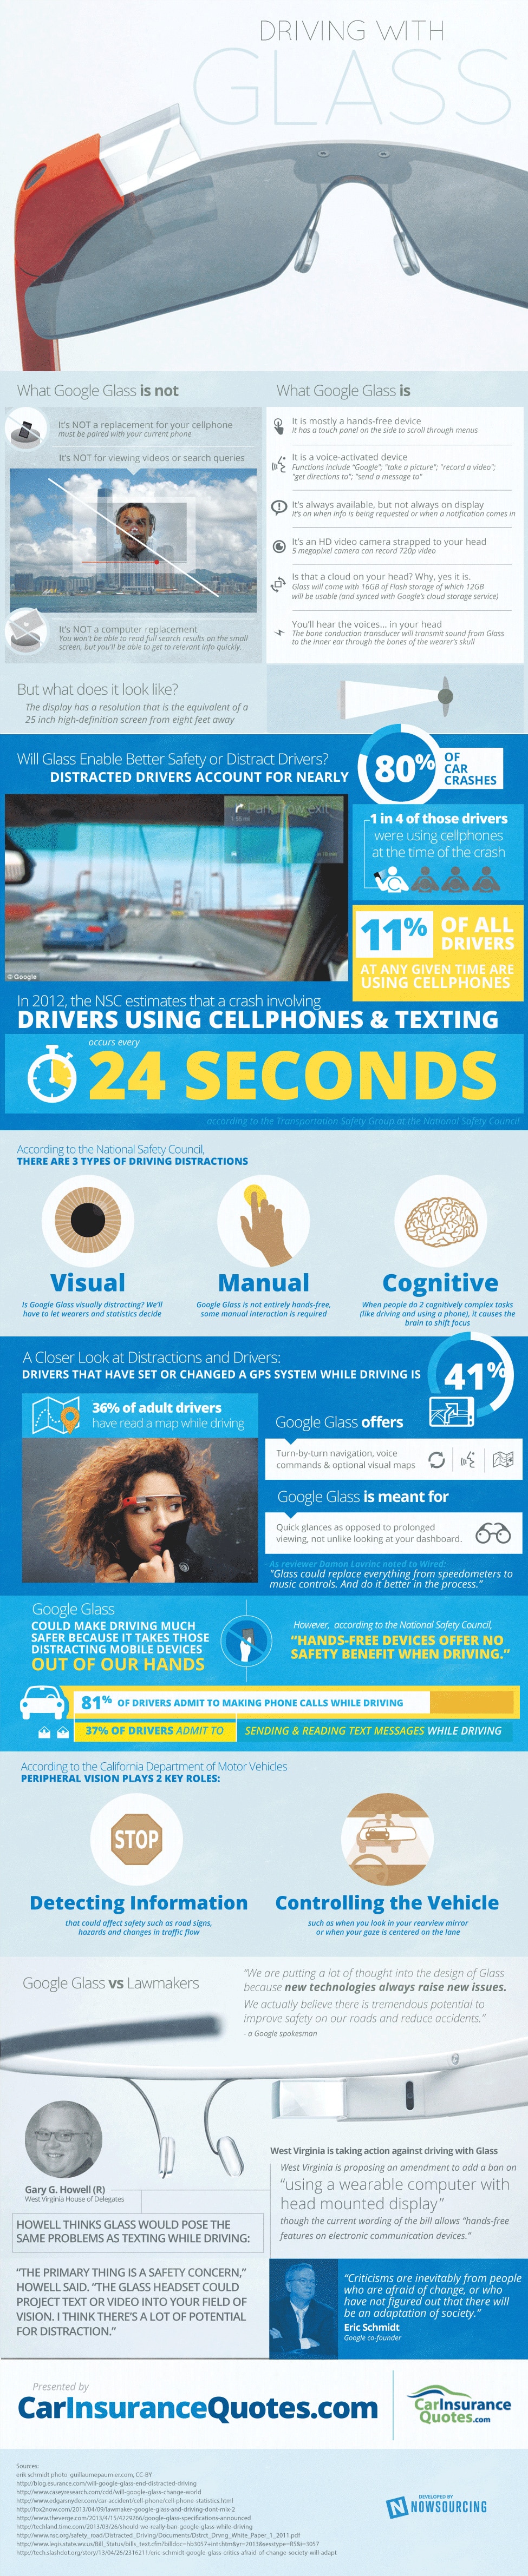 How Google Glass Will Affect Our Driving Experience [Infographic]